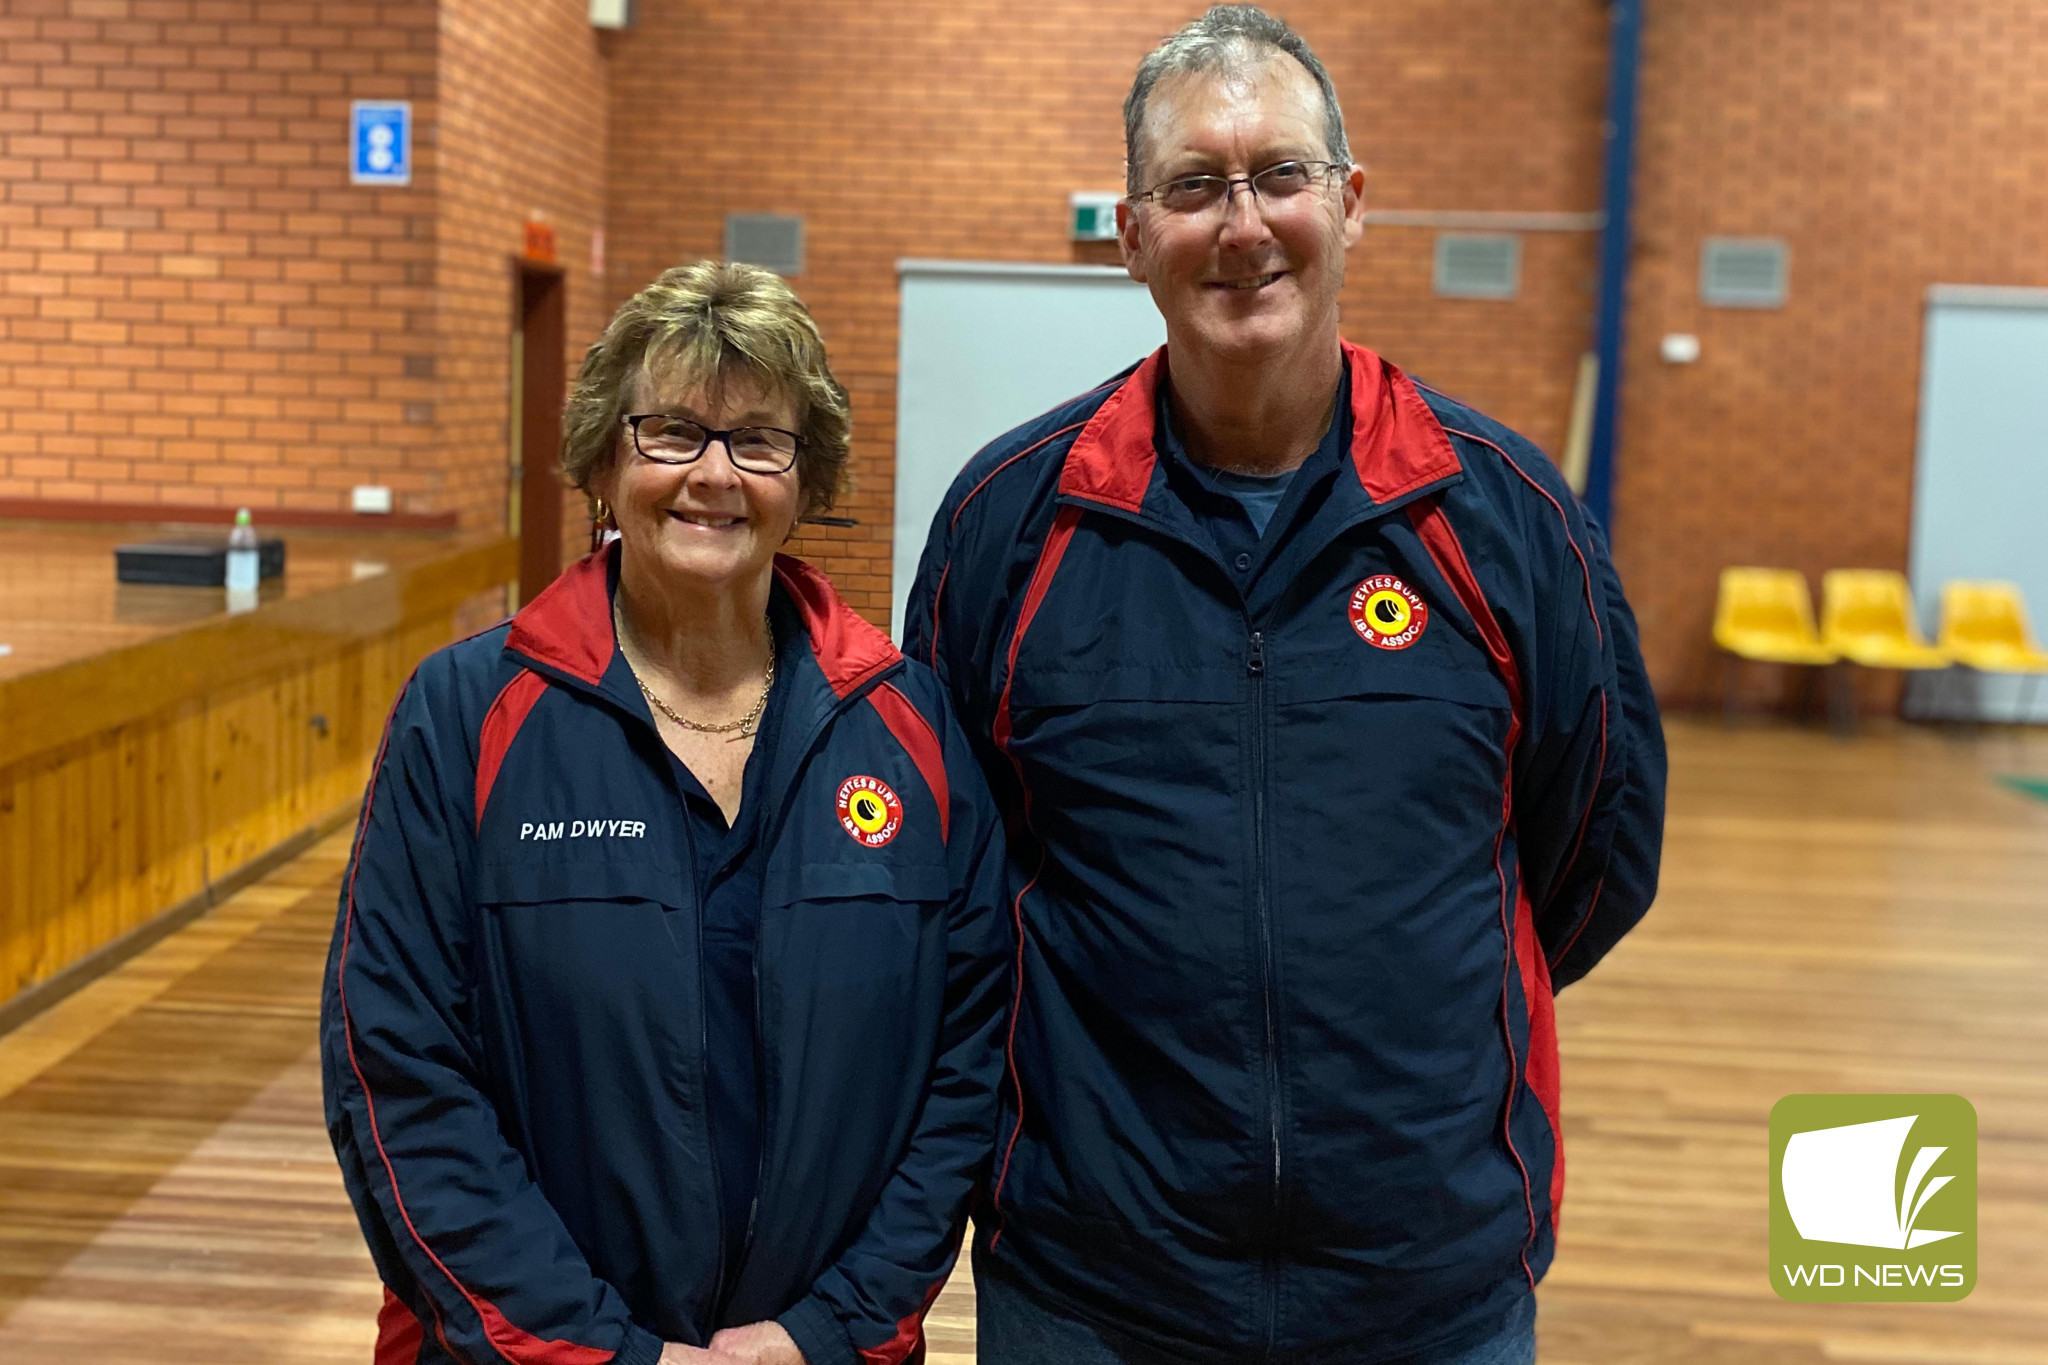 Friday, Heytesbury's Champion of Champions were crowned: (left) Pam Dwyer (Timboon Lawn) and (right) Lyndon Rogerson (Simpson)